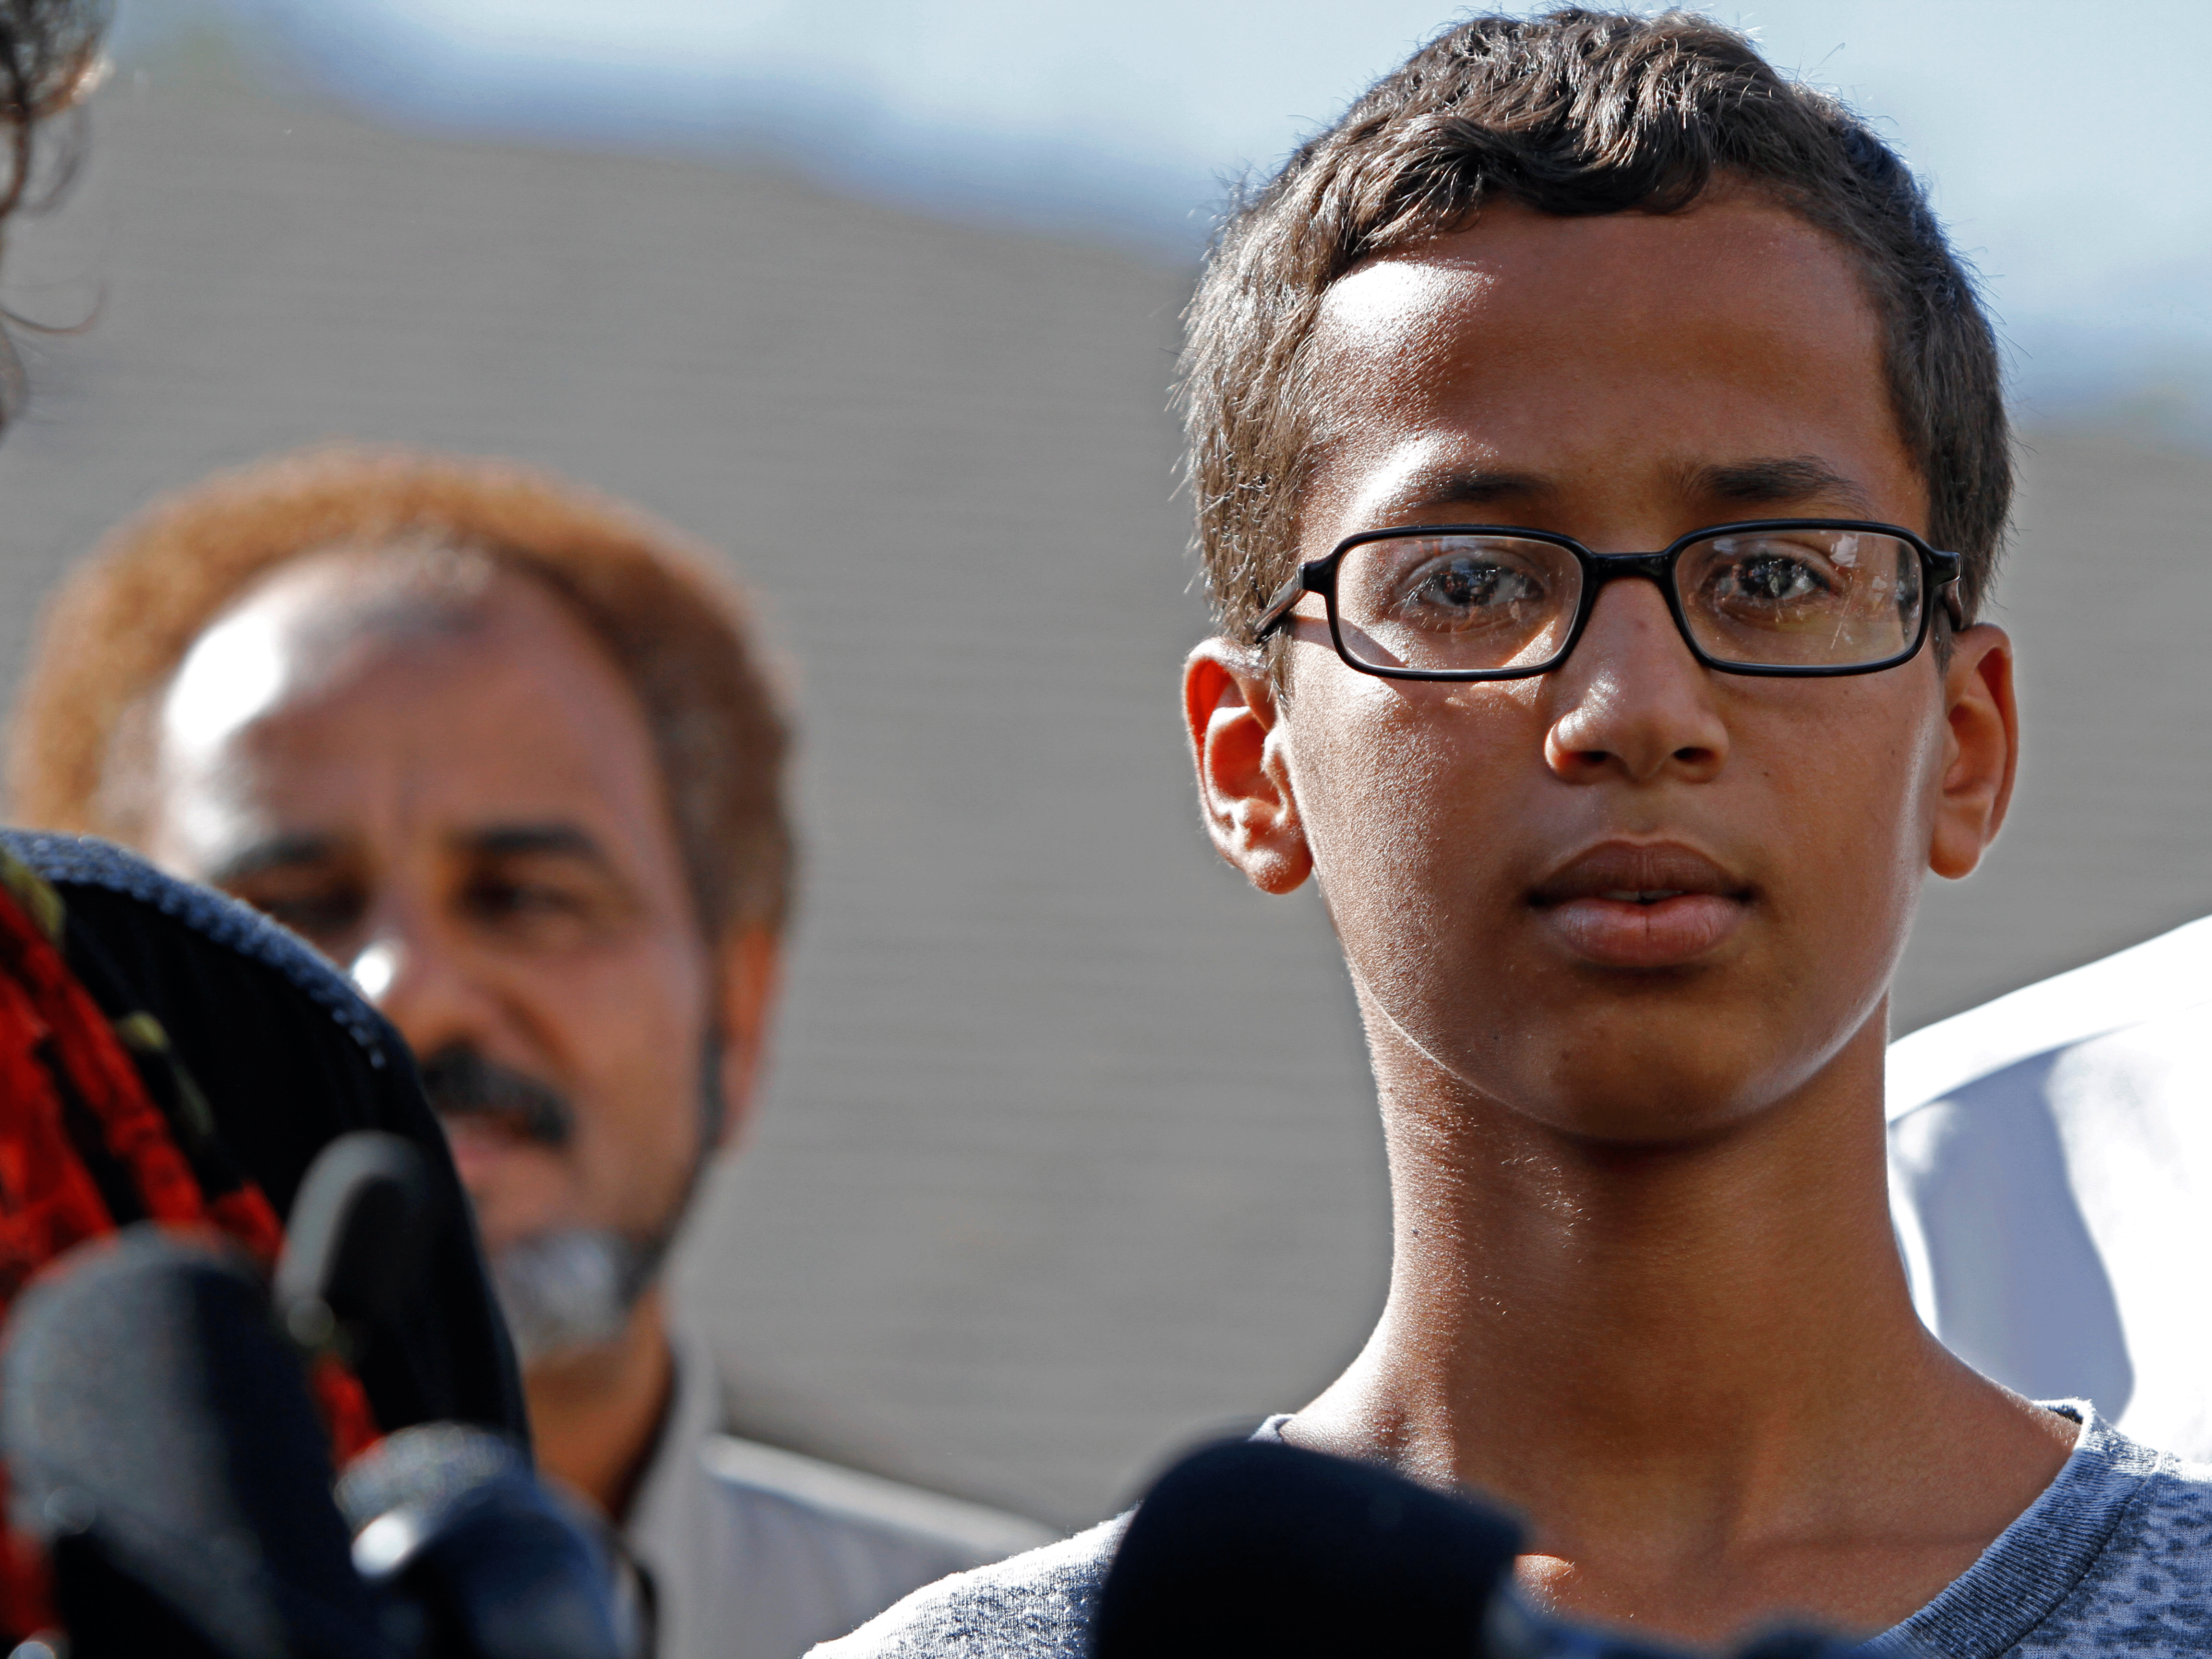 MIT, Facebook, and Google line-up to recruit Ahmed Mohamed